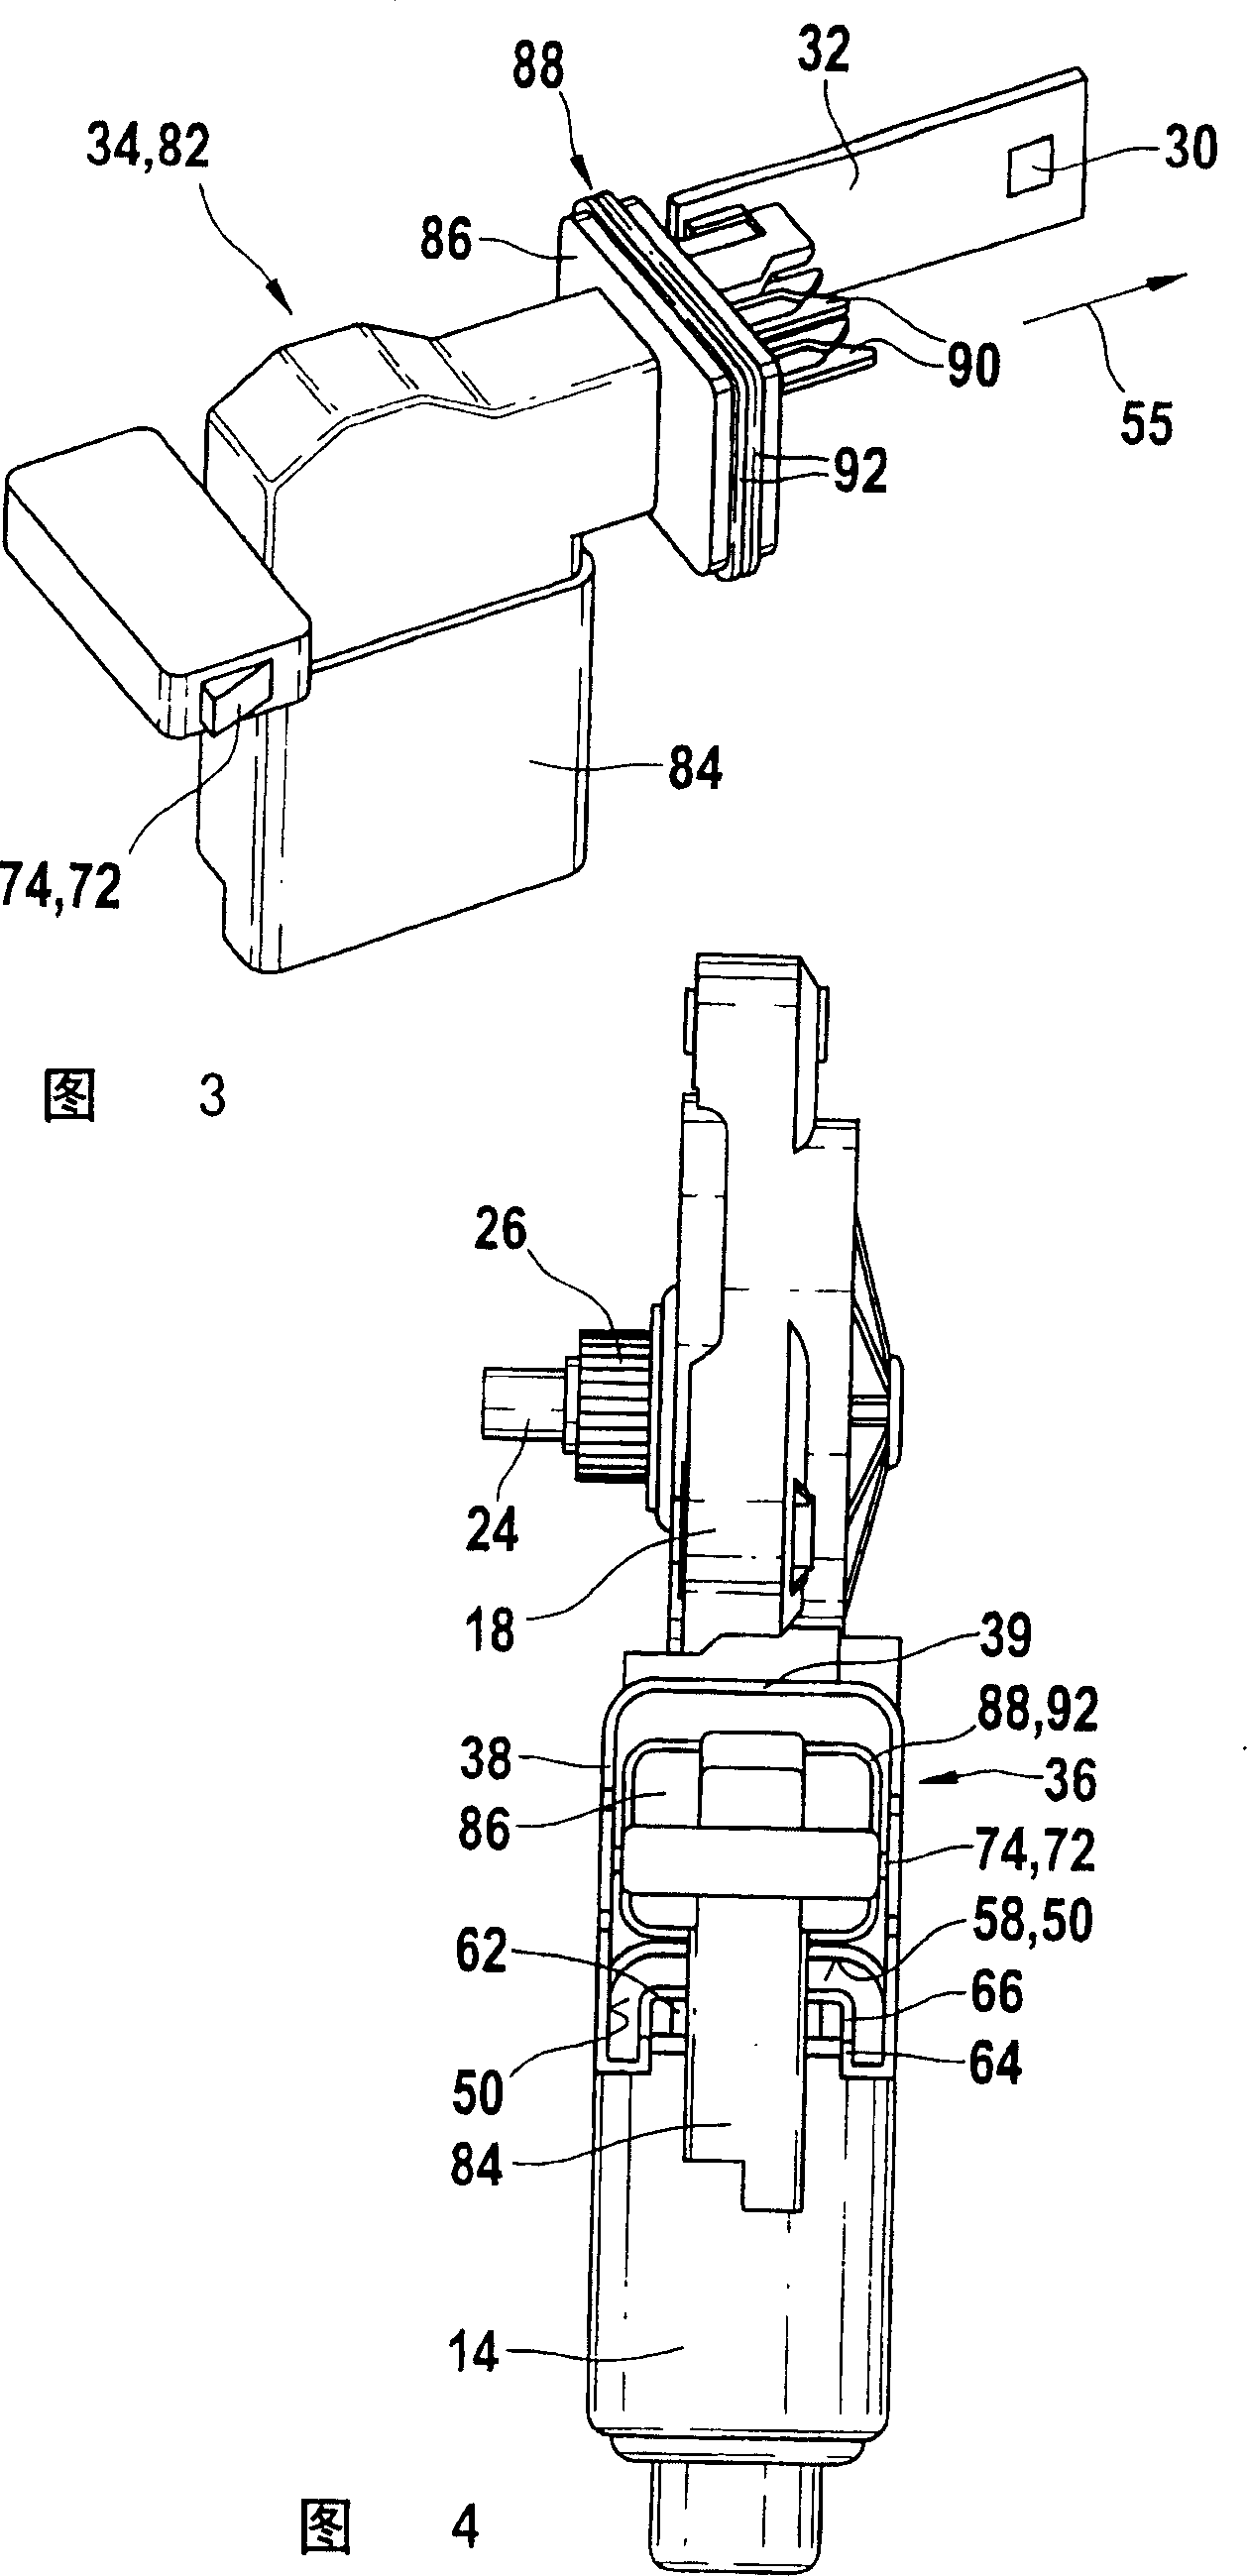 Gearing drive unit comprising an electronics interface